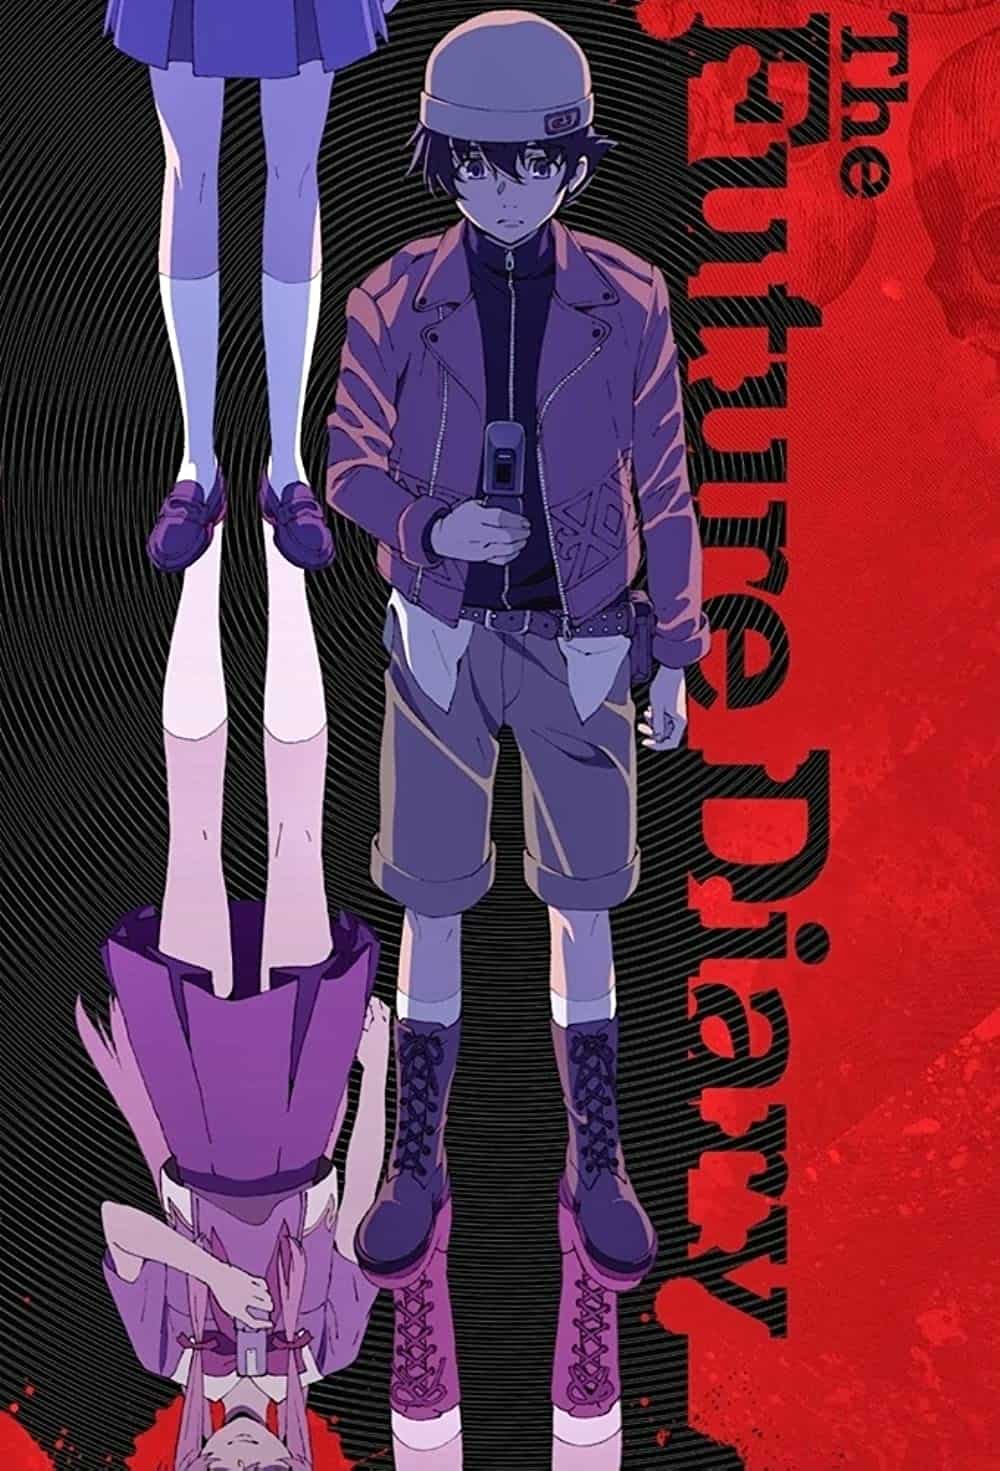 The Future Diary hd poster